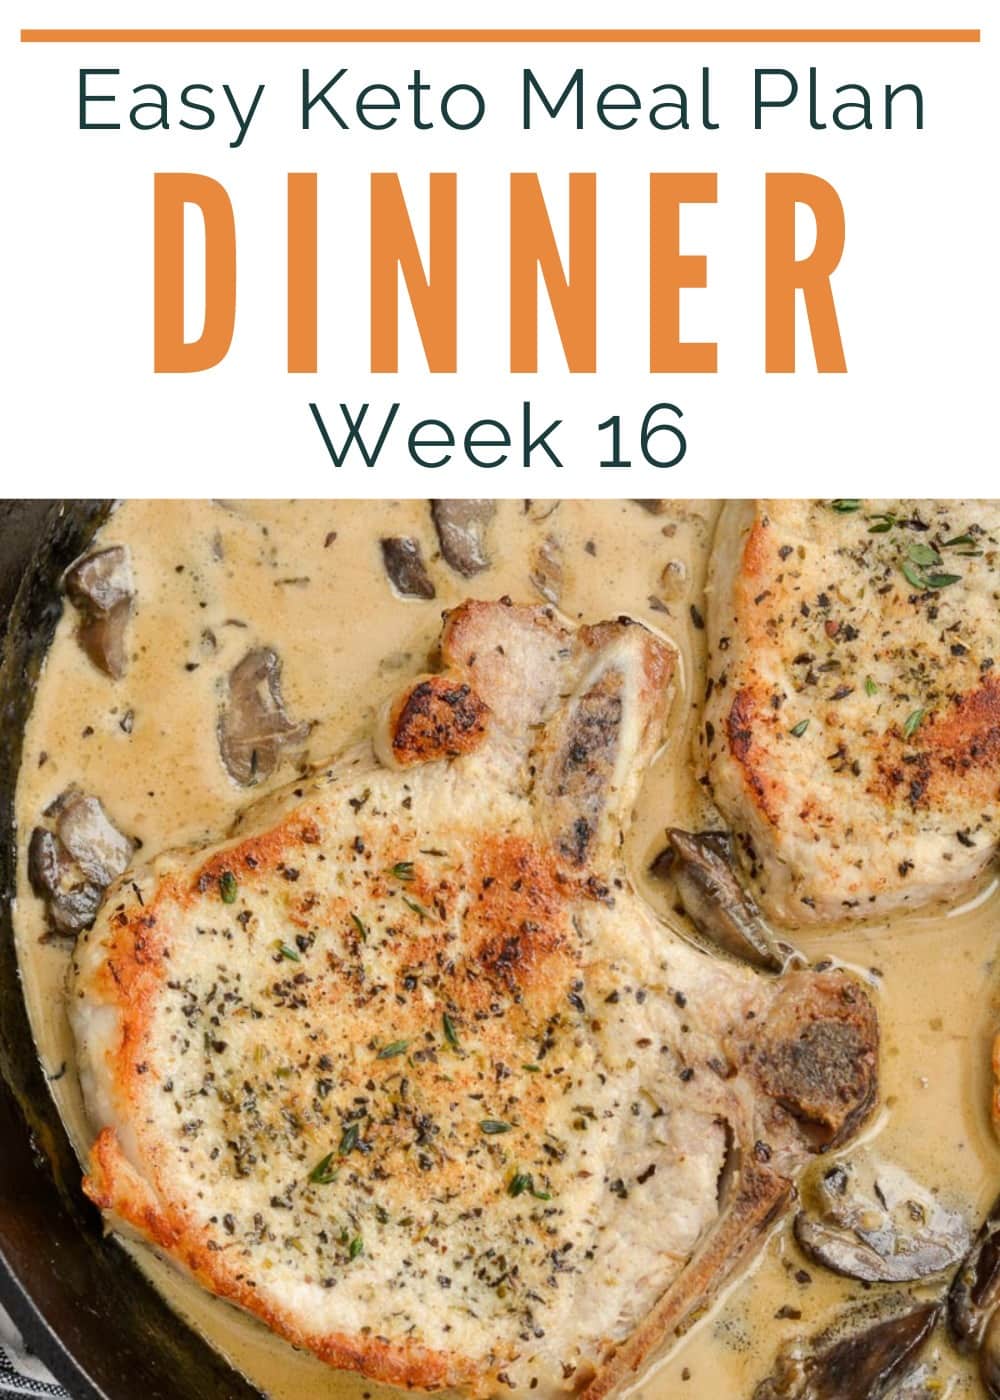  Week 16 of my Easy Keto Meal Plan includes 5 EASY keto meals plus a low-carb dessert you can meal prep! This guide is complete with net carb counts and a printable shopping list.